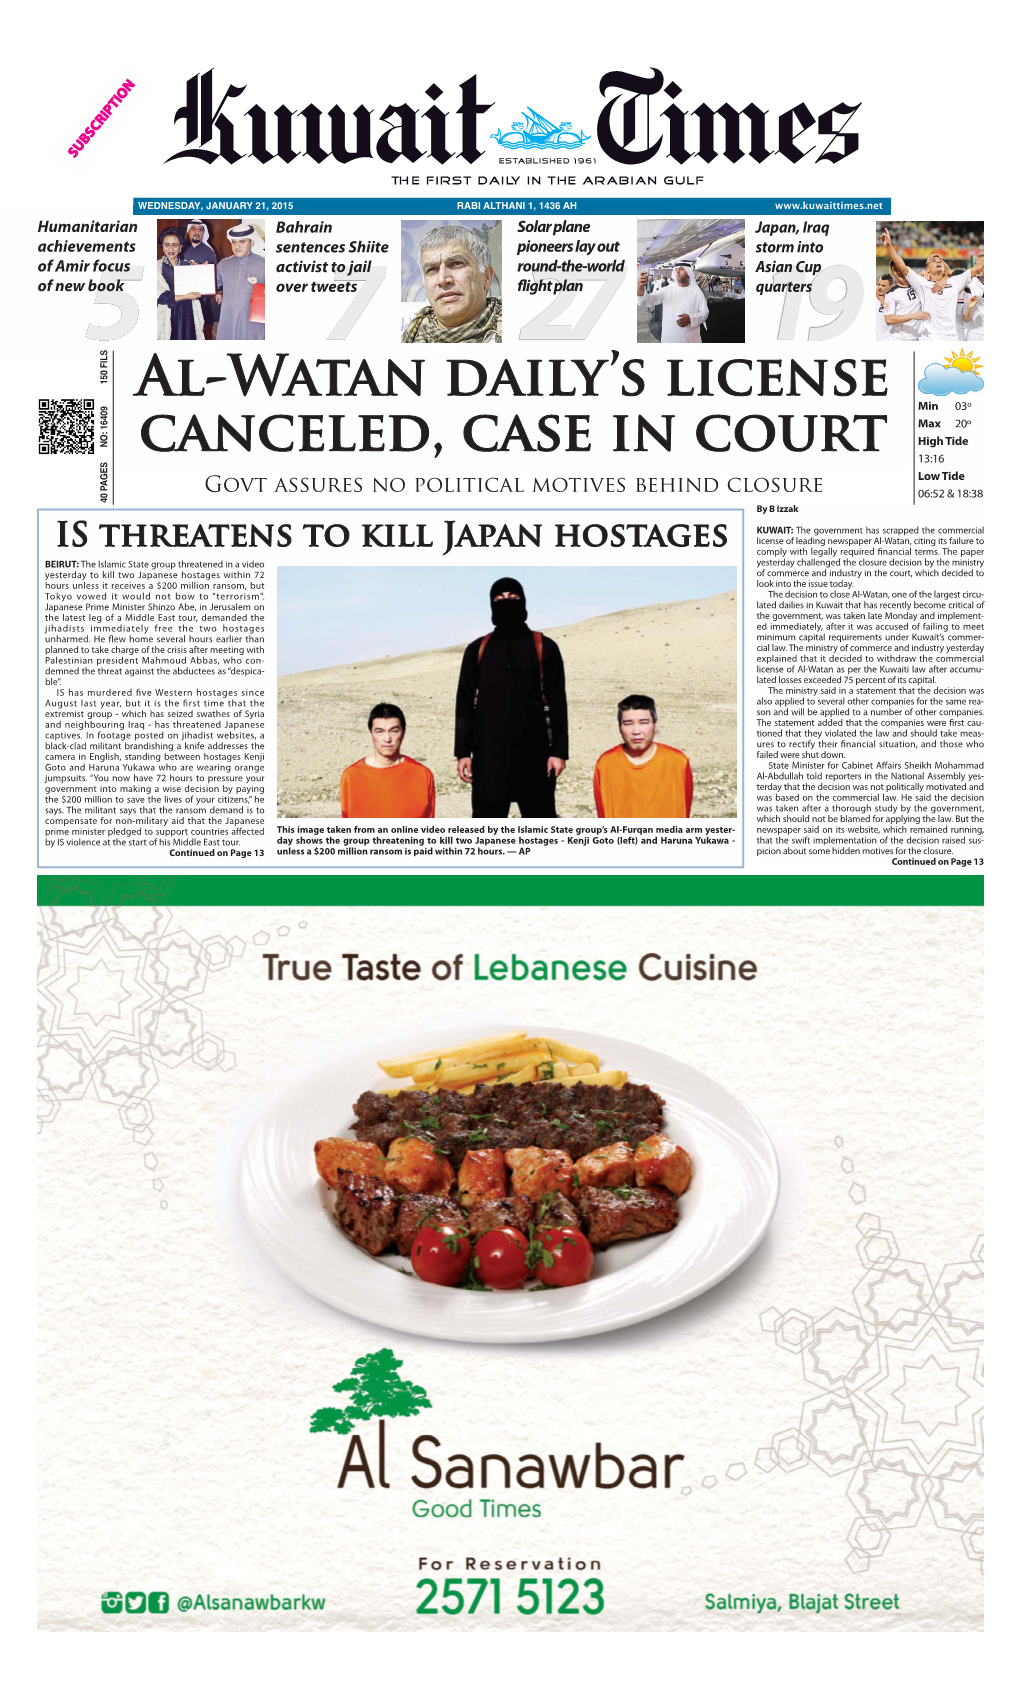 Al-Watan Daily's License Canceled, Case in Court